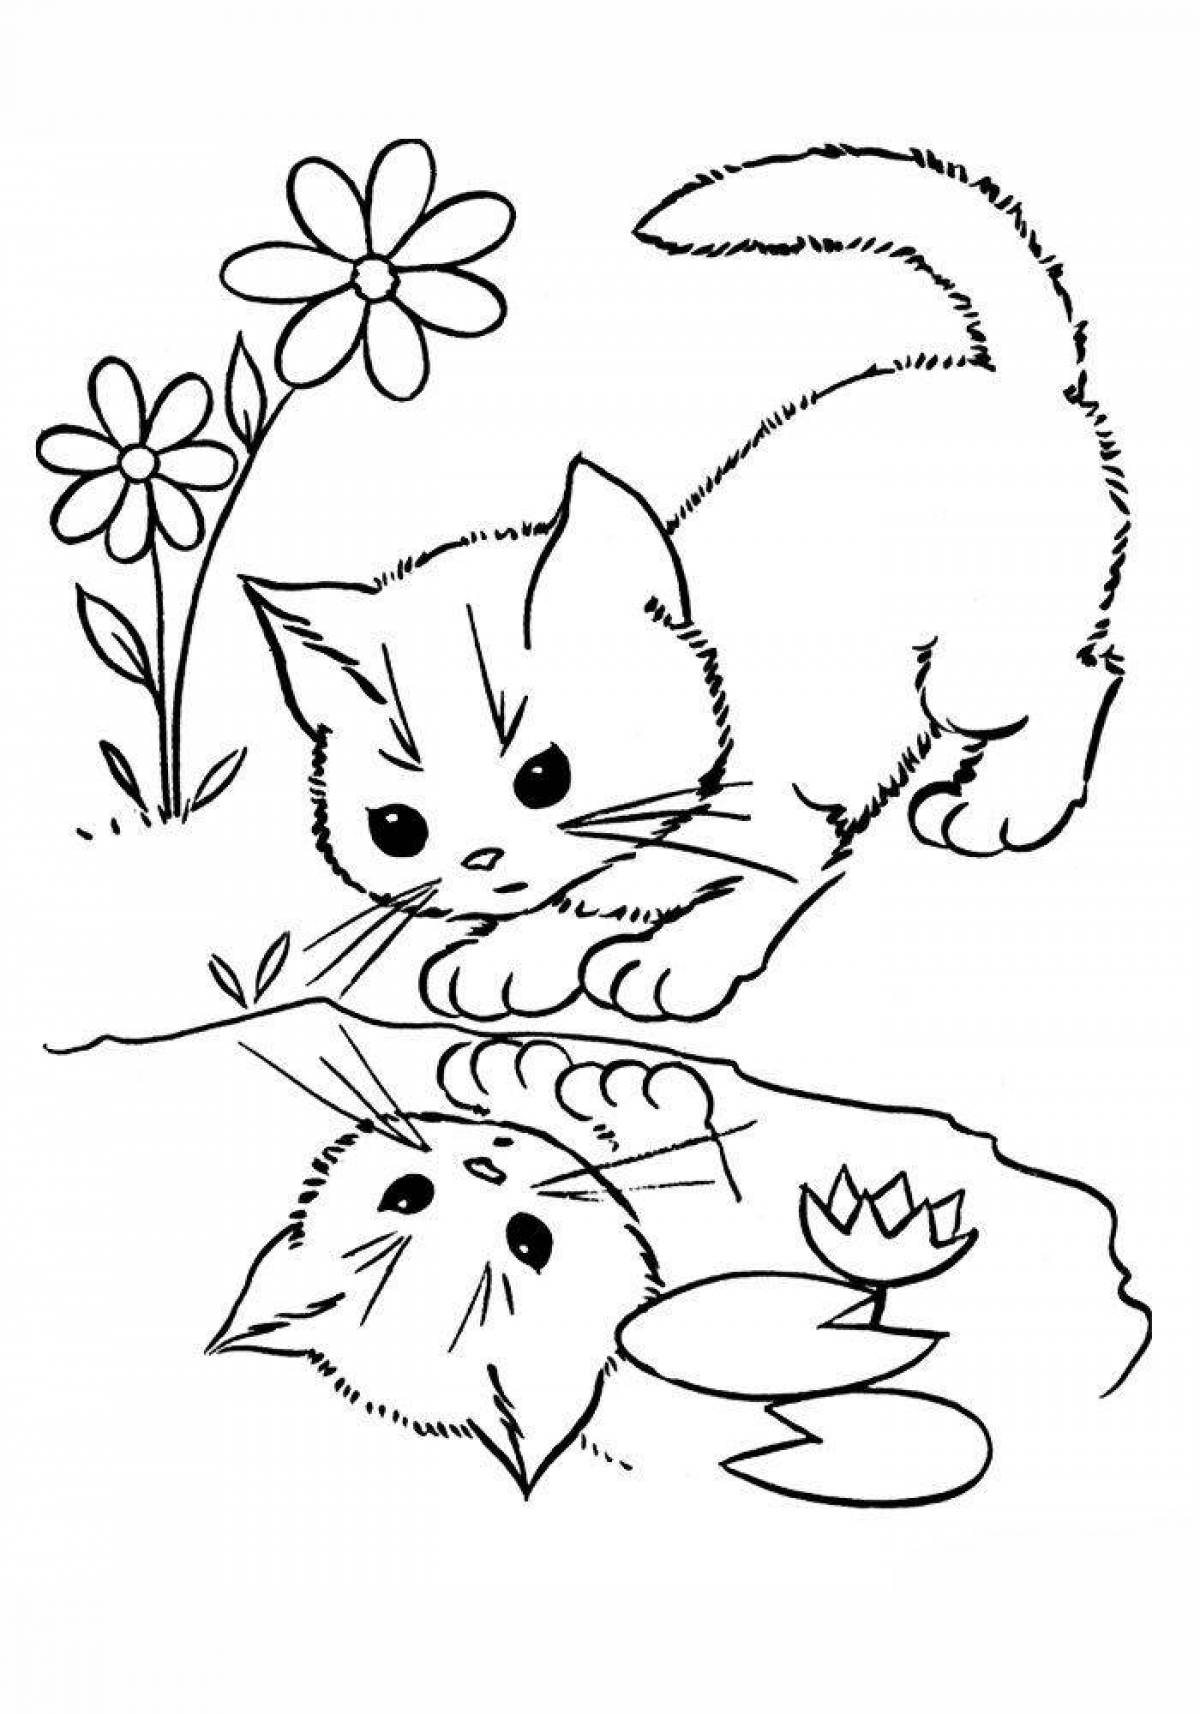 Funny kitty coloring book for kids 4-5 years old